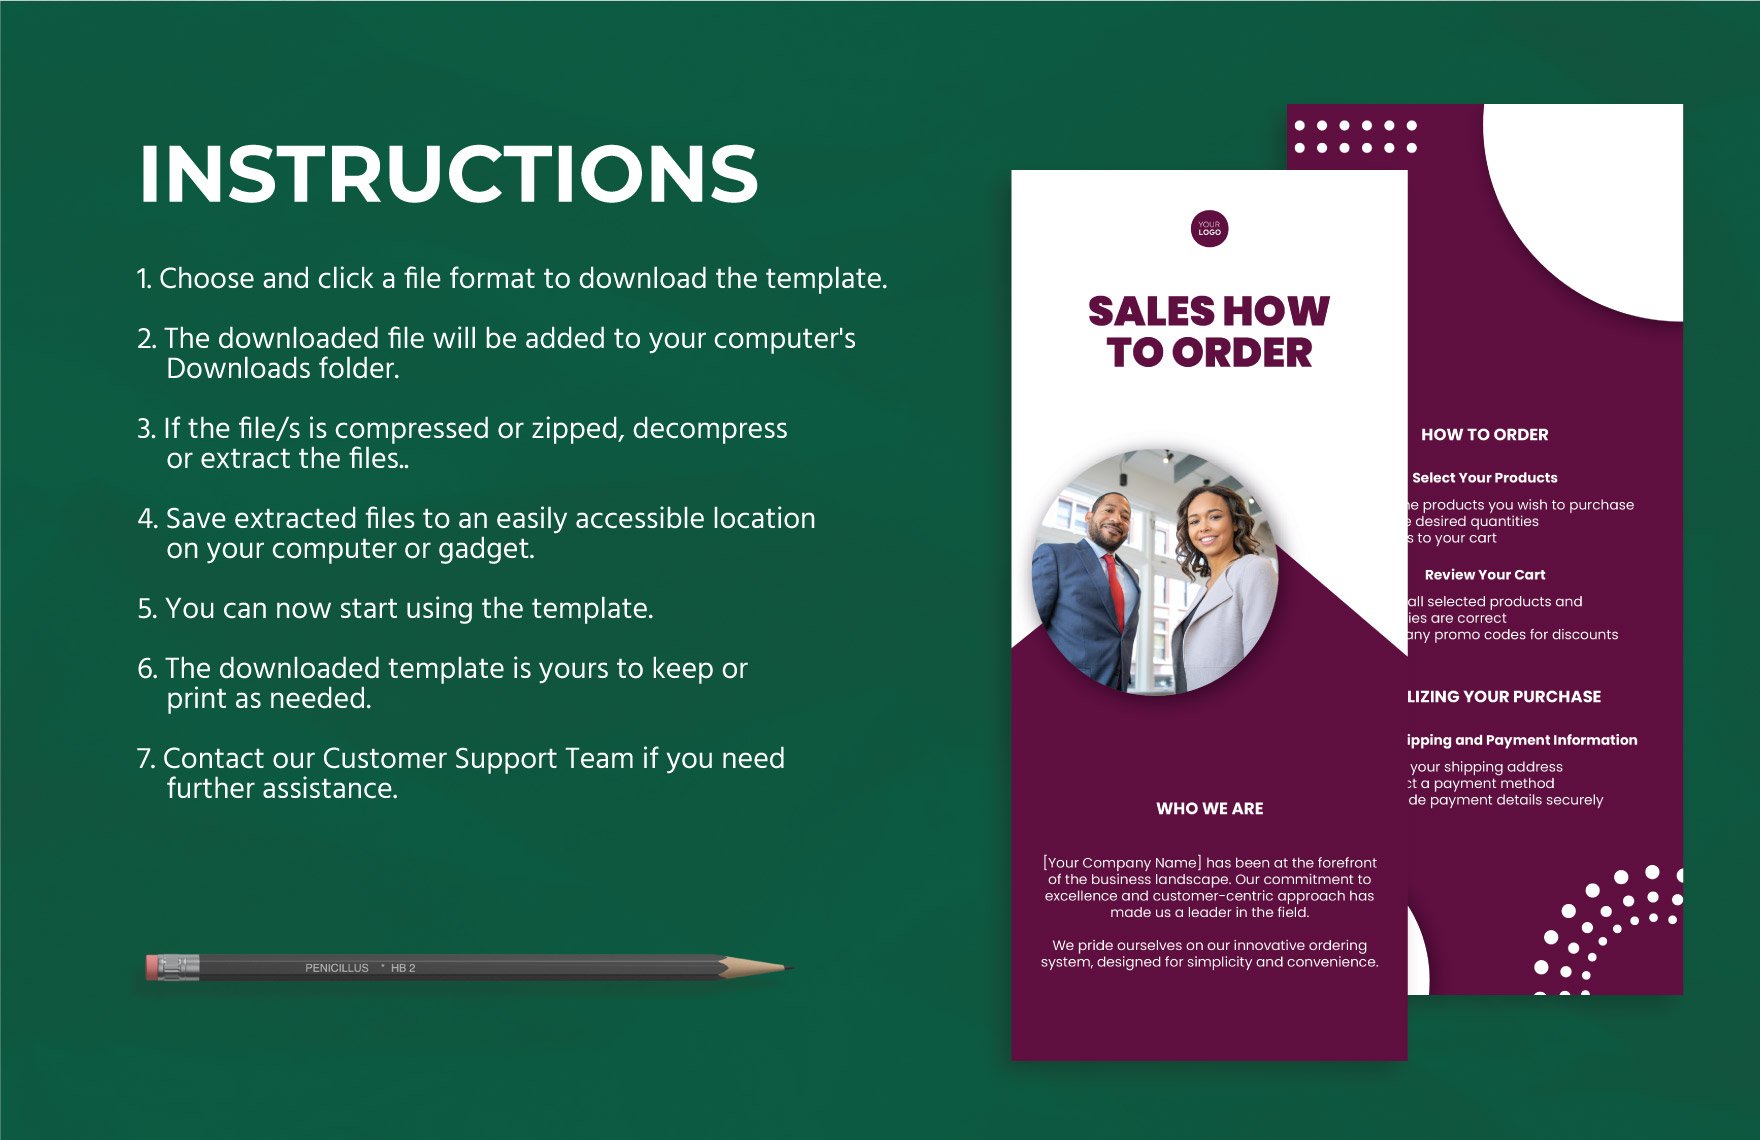 Sales How to Order Rack Card Template